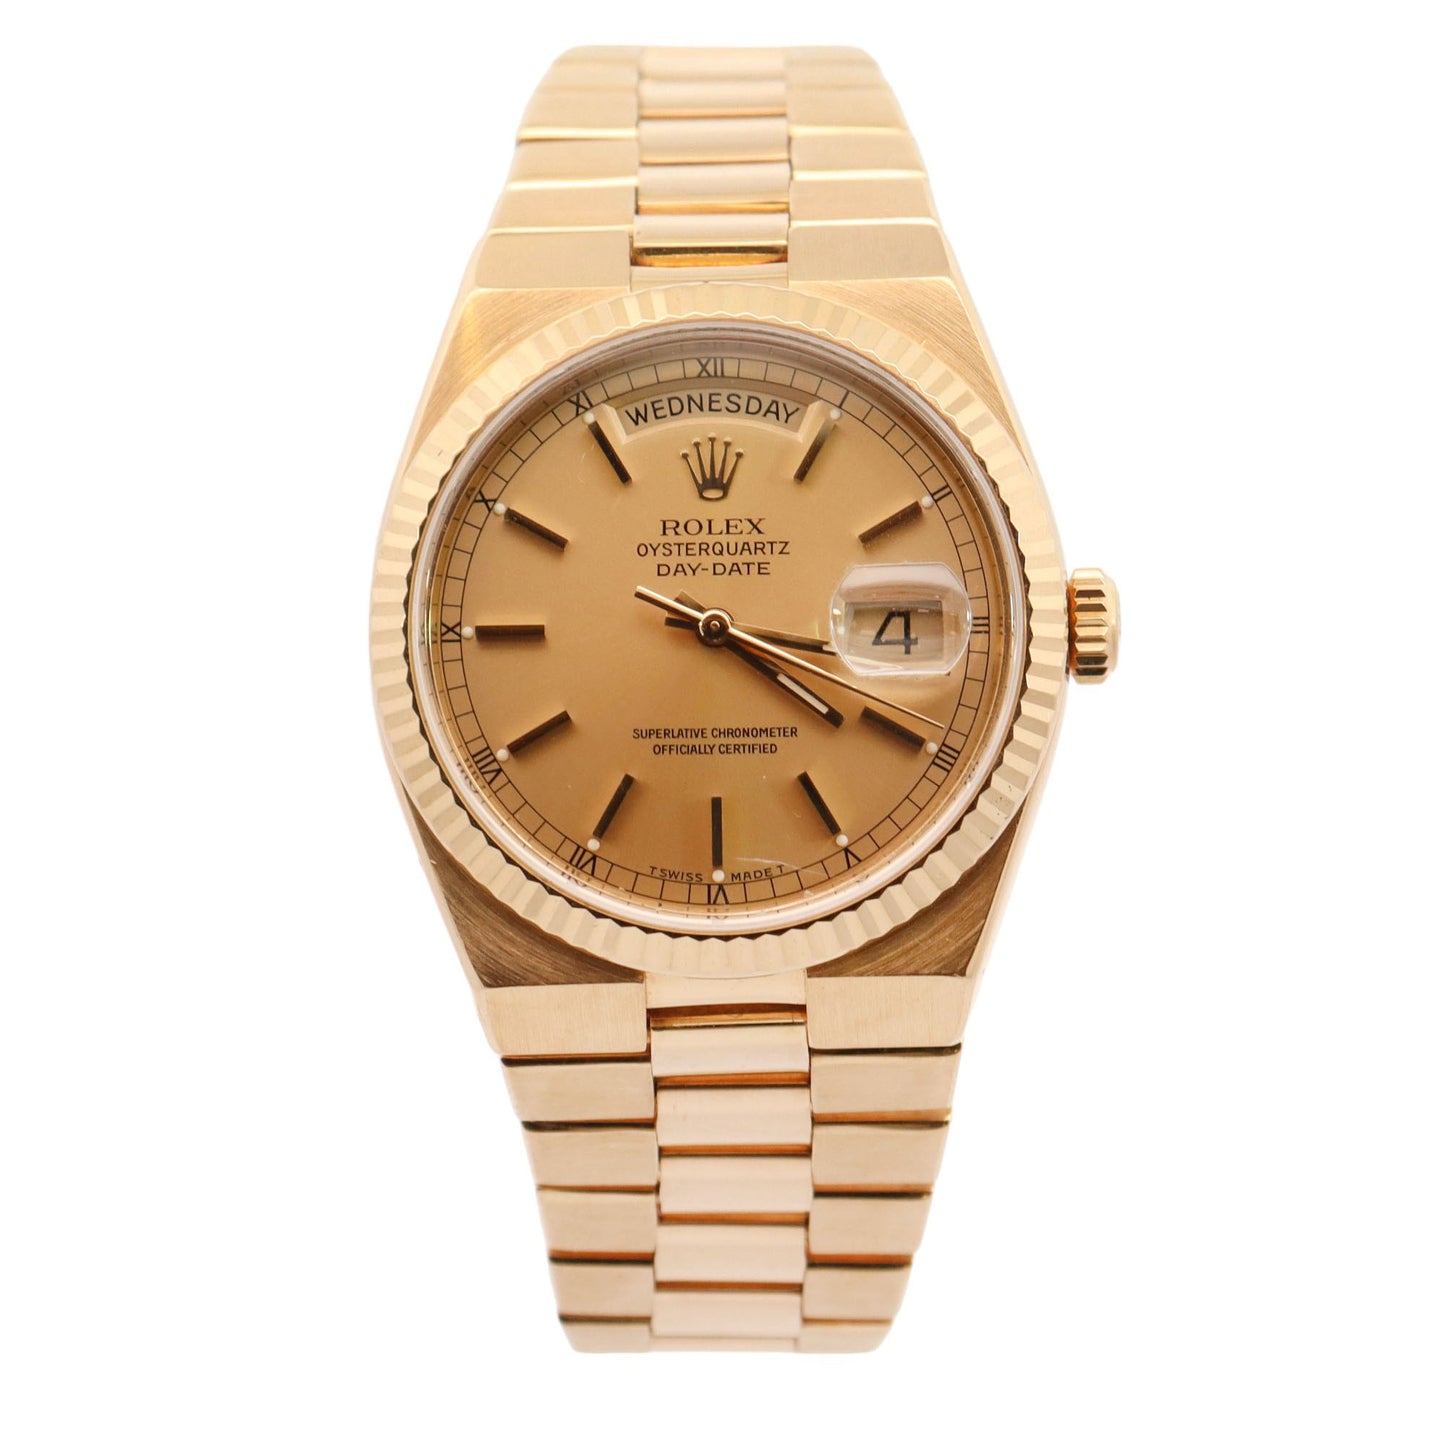 Rolex Oysterquartz Day-Date Yellow Gold 36mm Champagne Stick Dial Watch Reference# 19018